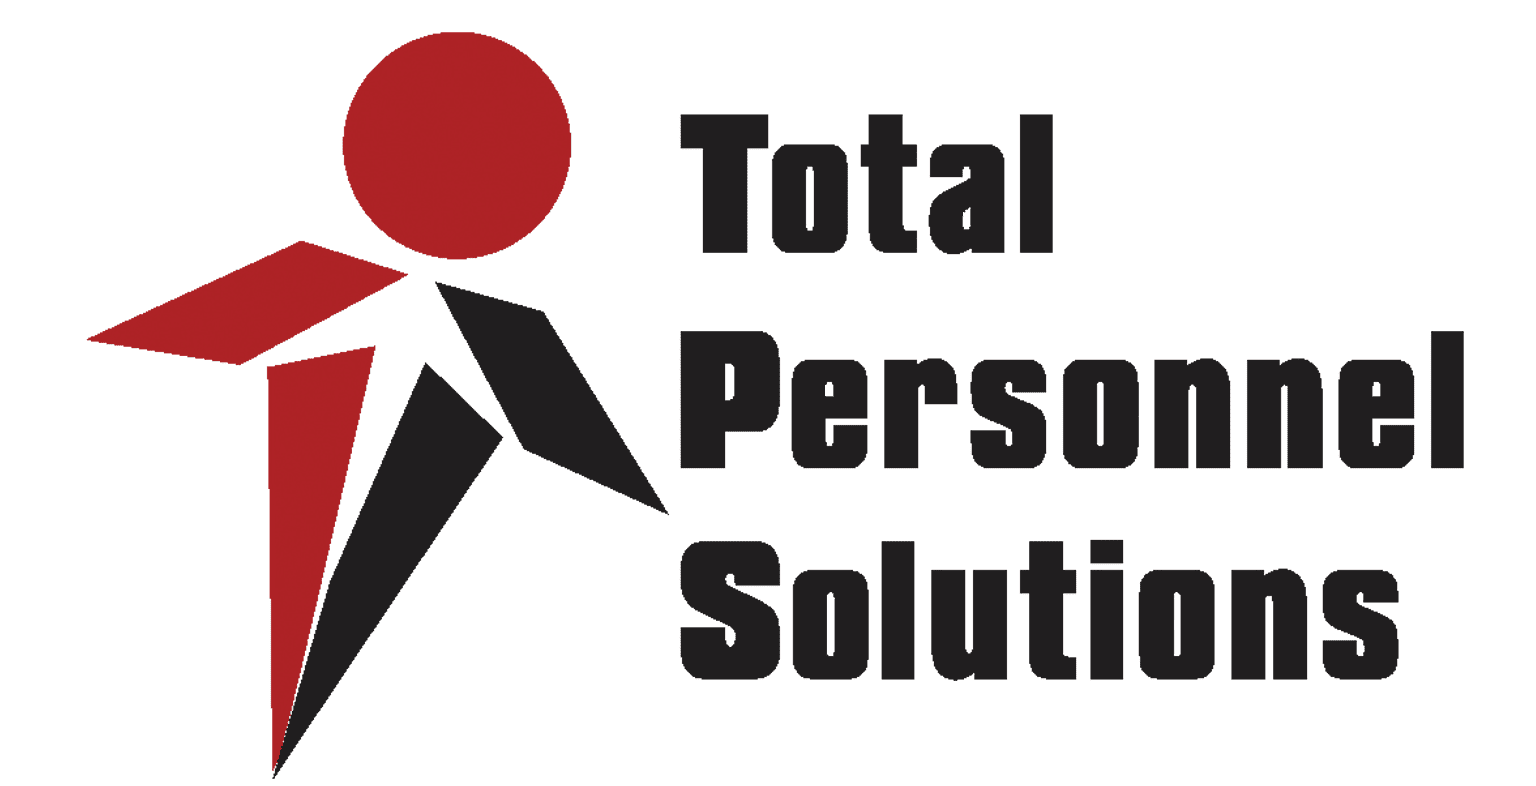 total personnel solutions sudbury